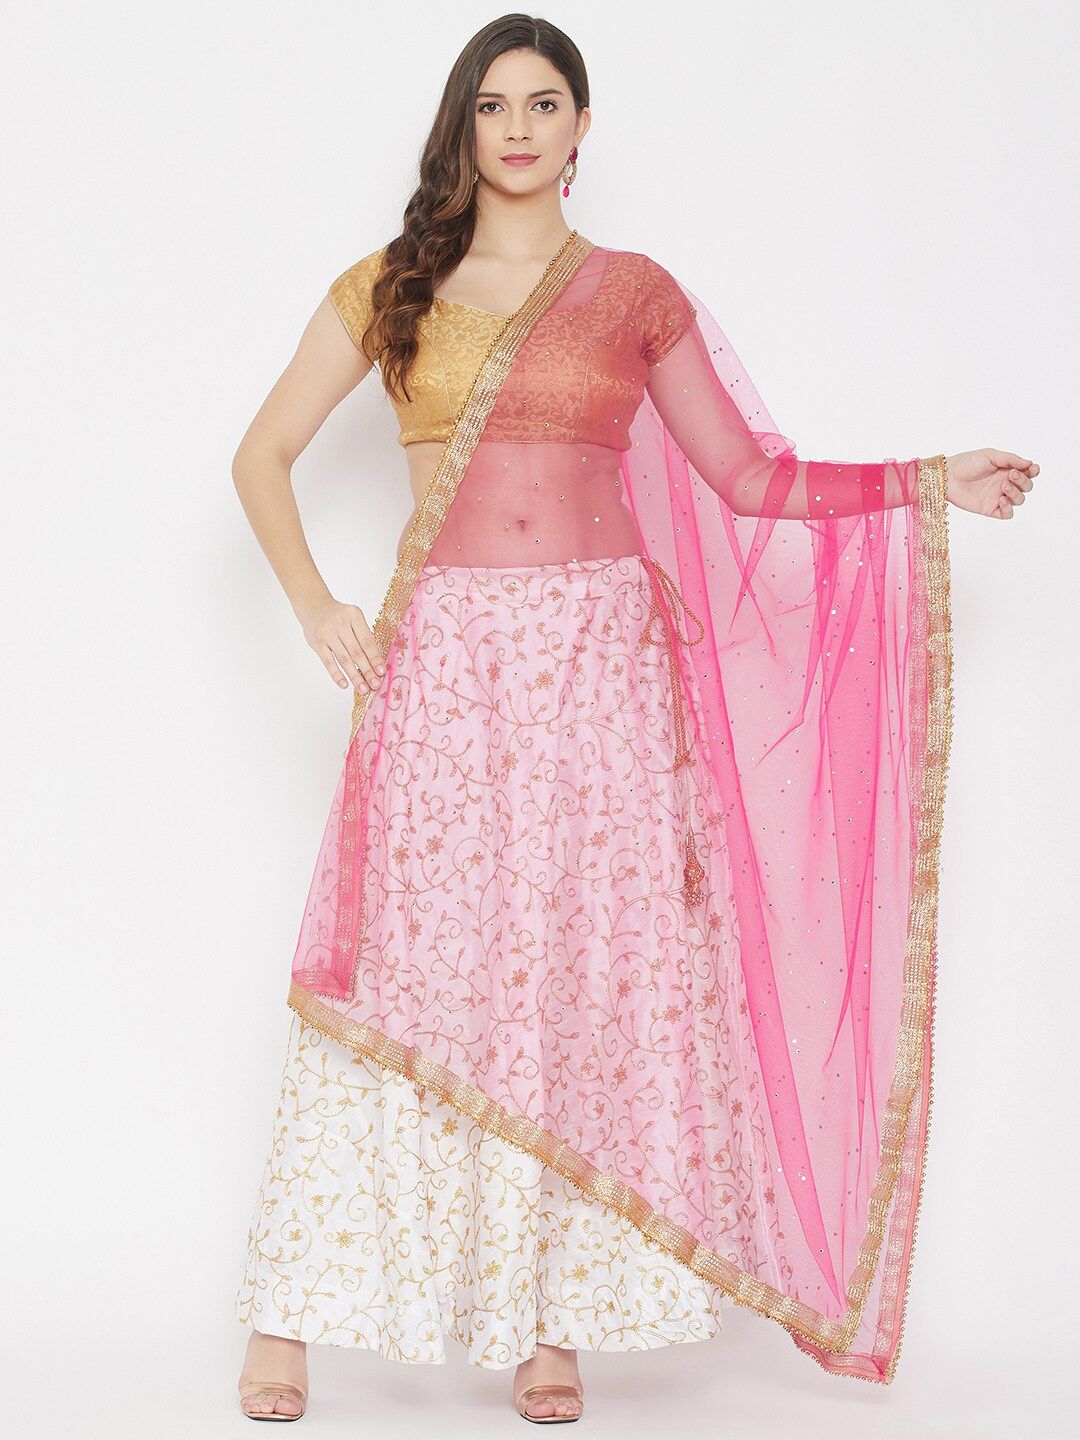 Clora Creation Pink & Gold-Toned Ethnic Motifs Embroidered Net Dupatta with Beads & Stones Price in India